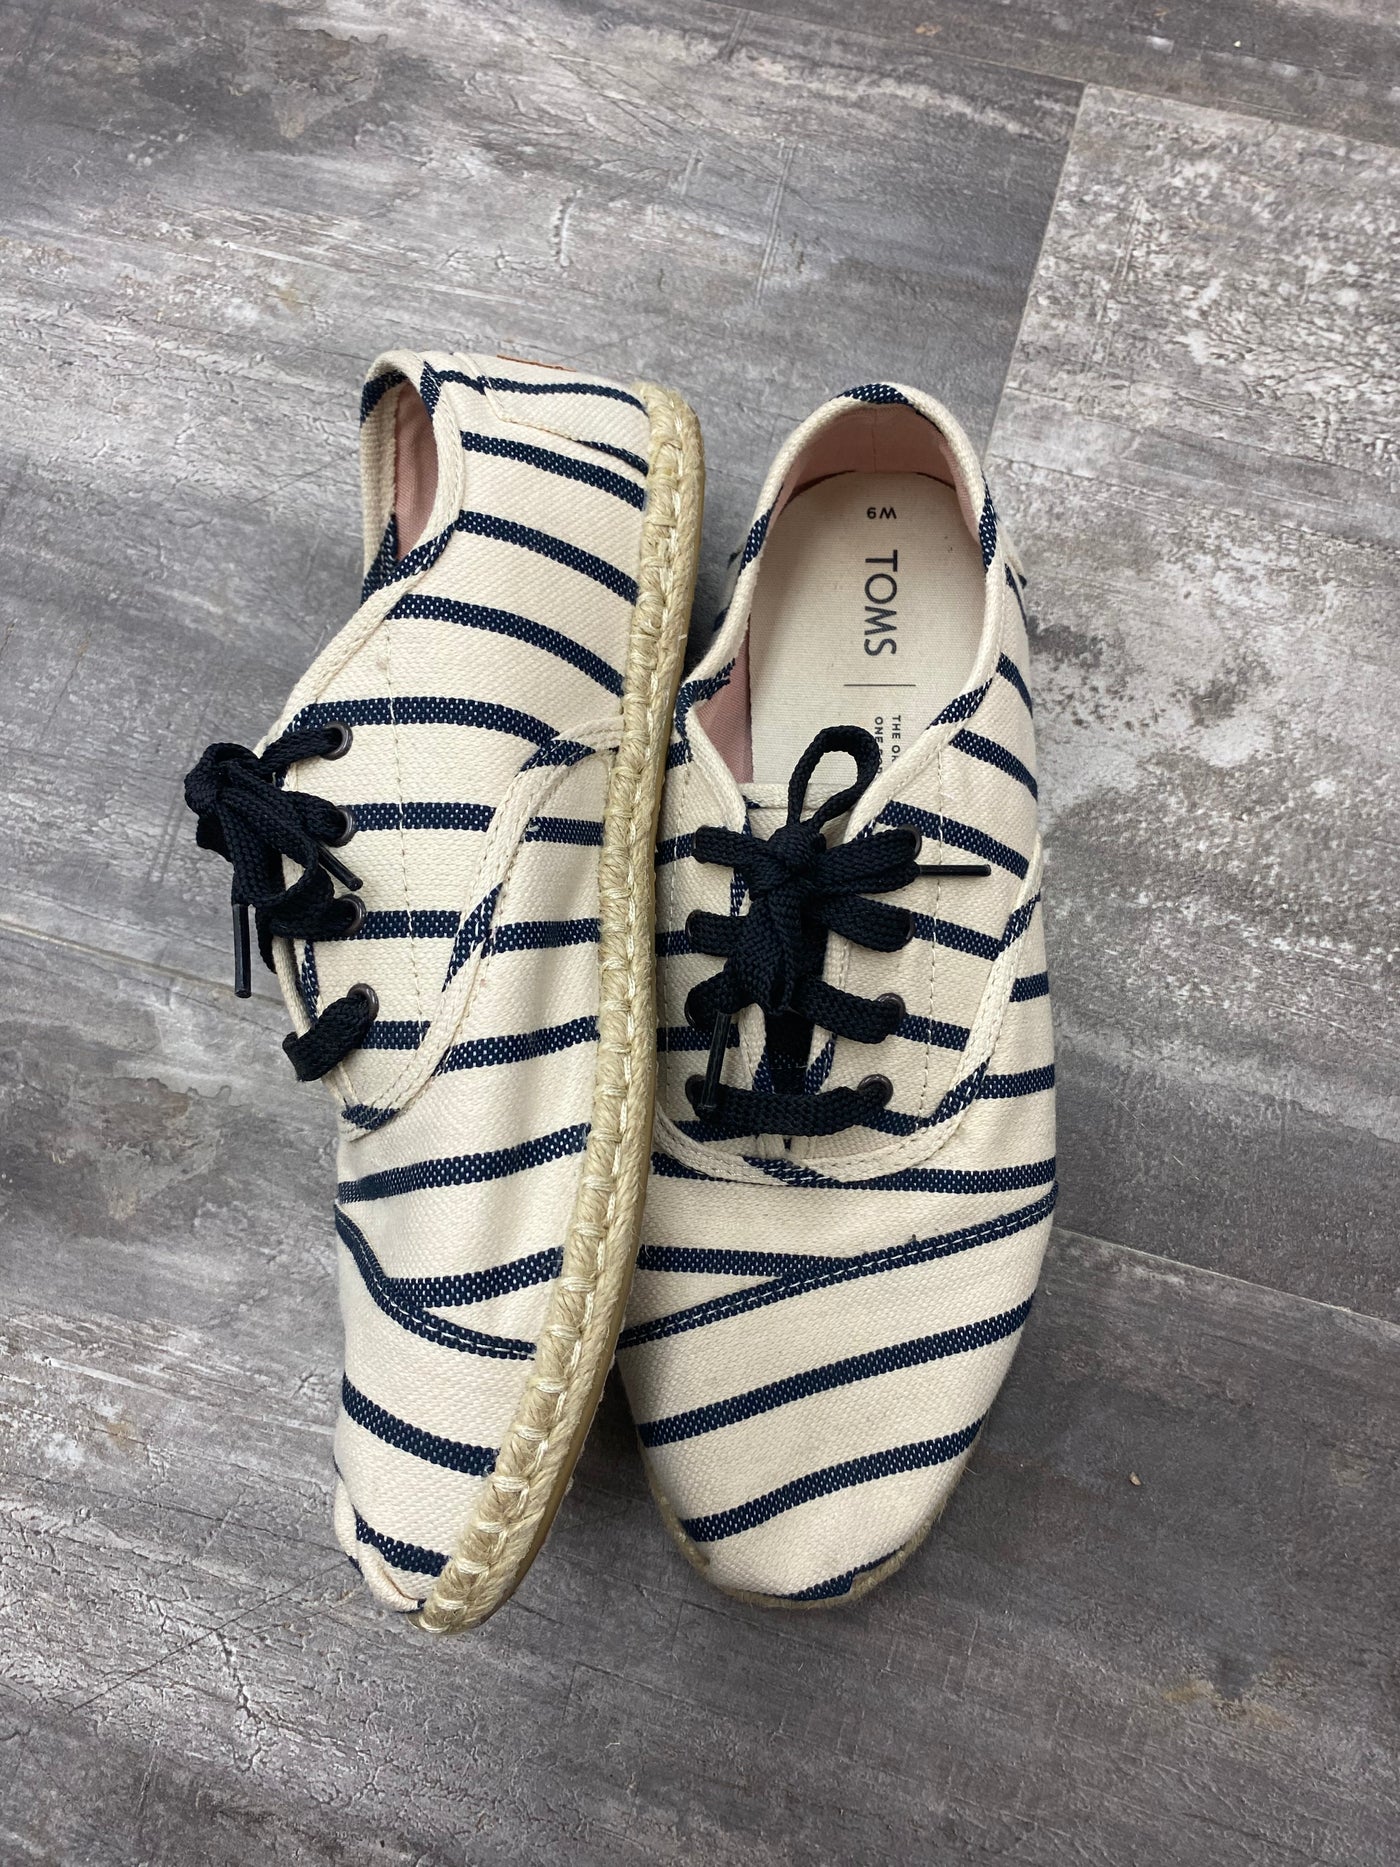 Tom’s striped casual flats